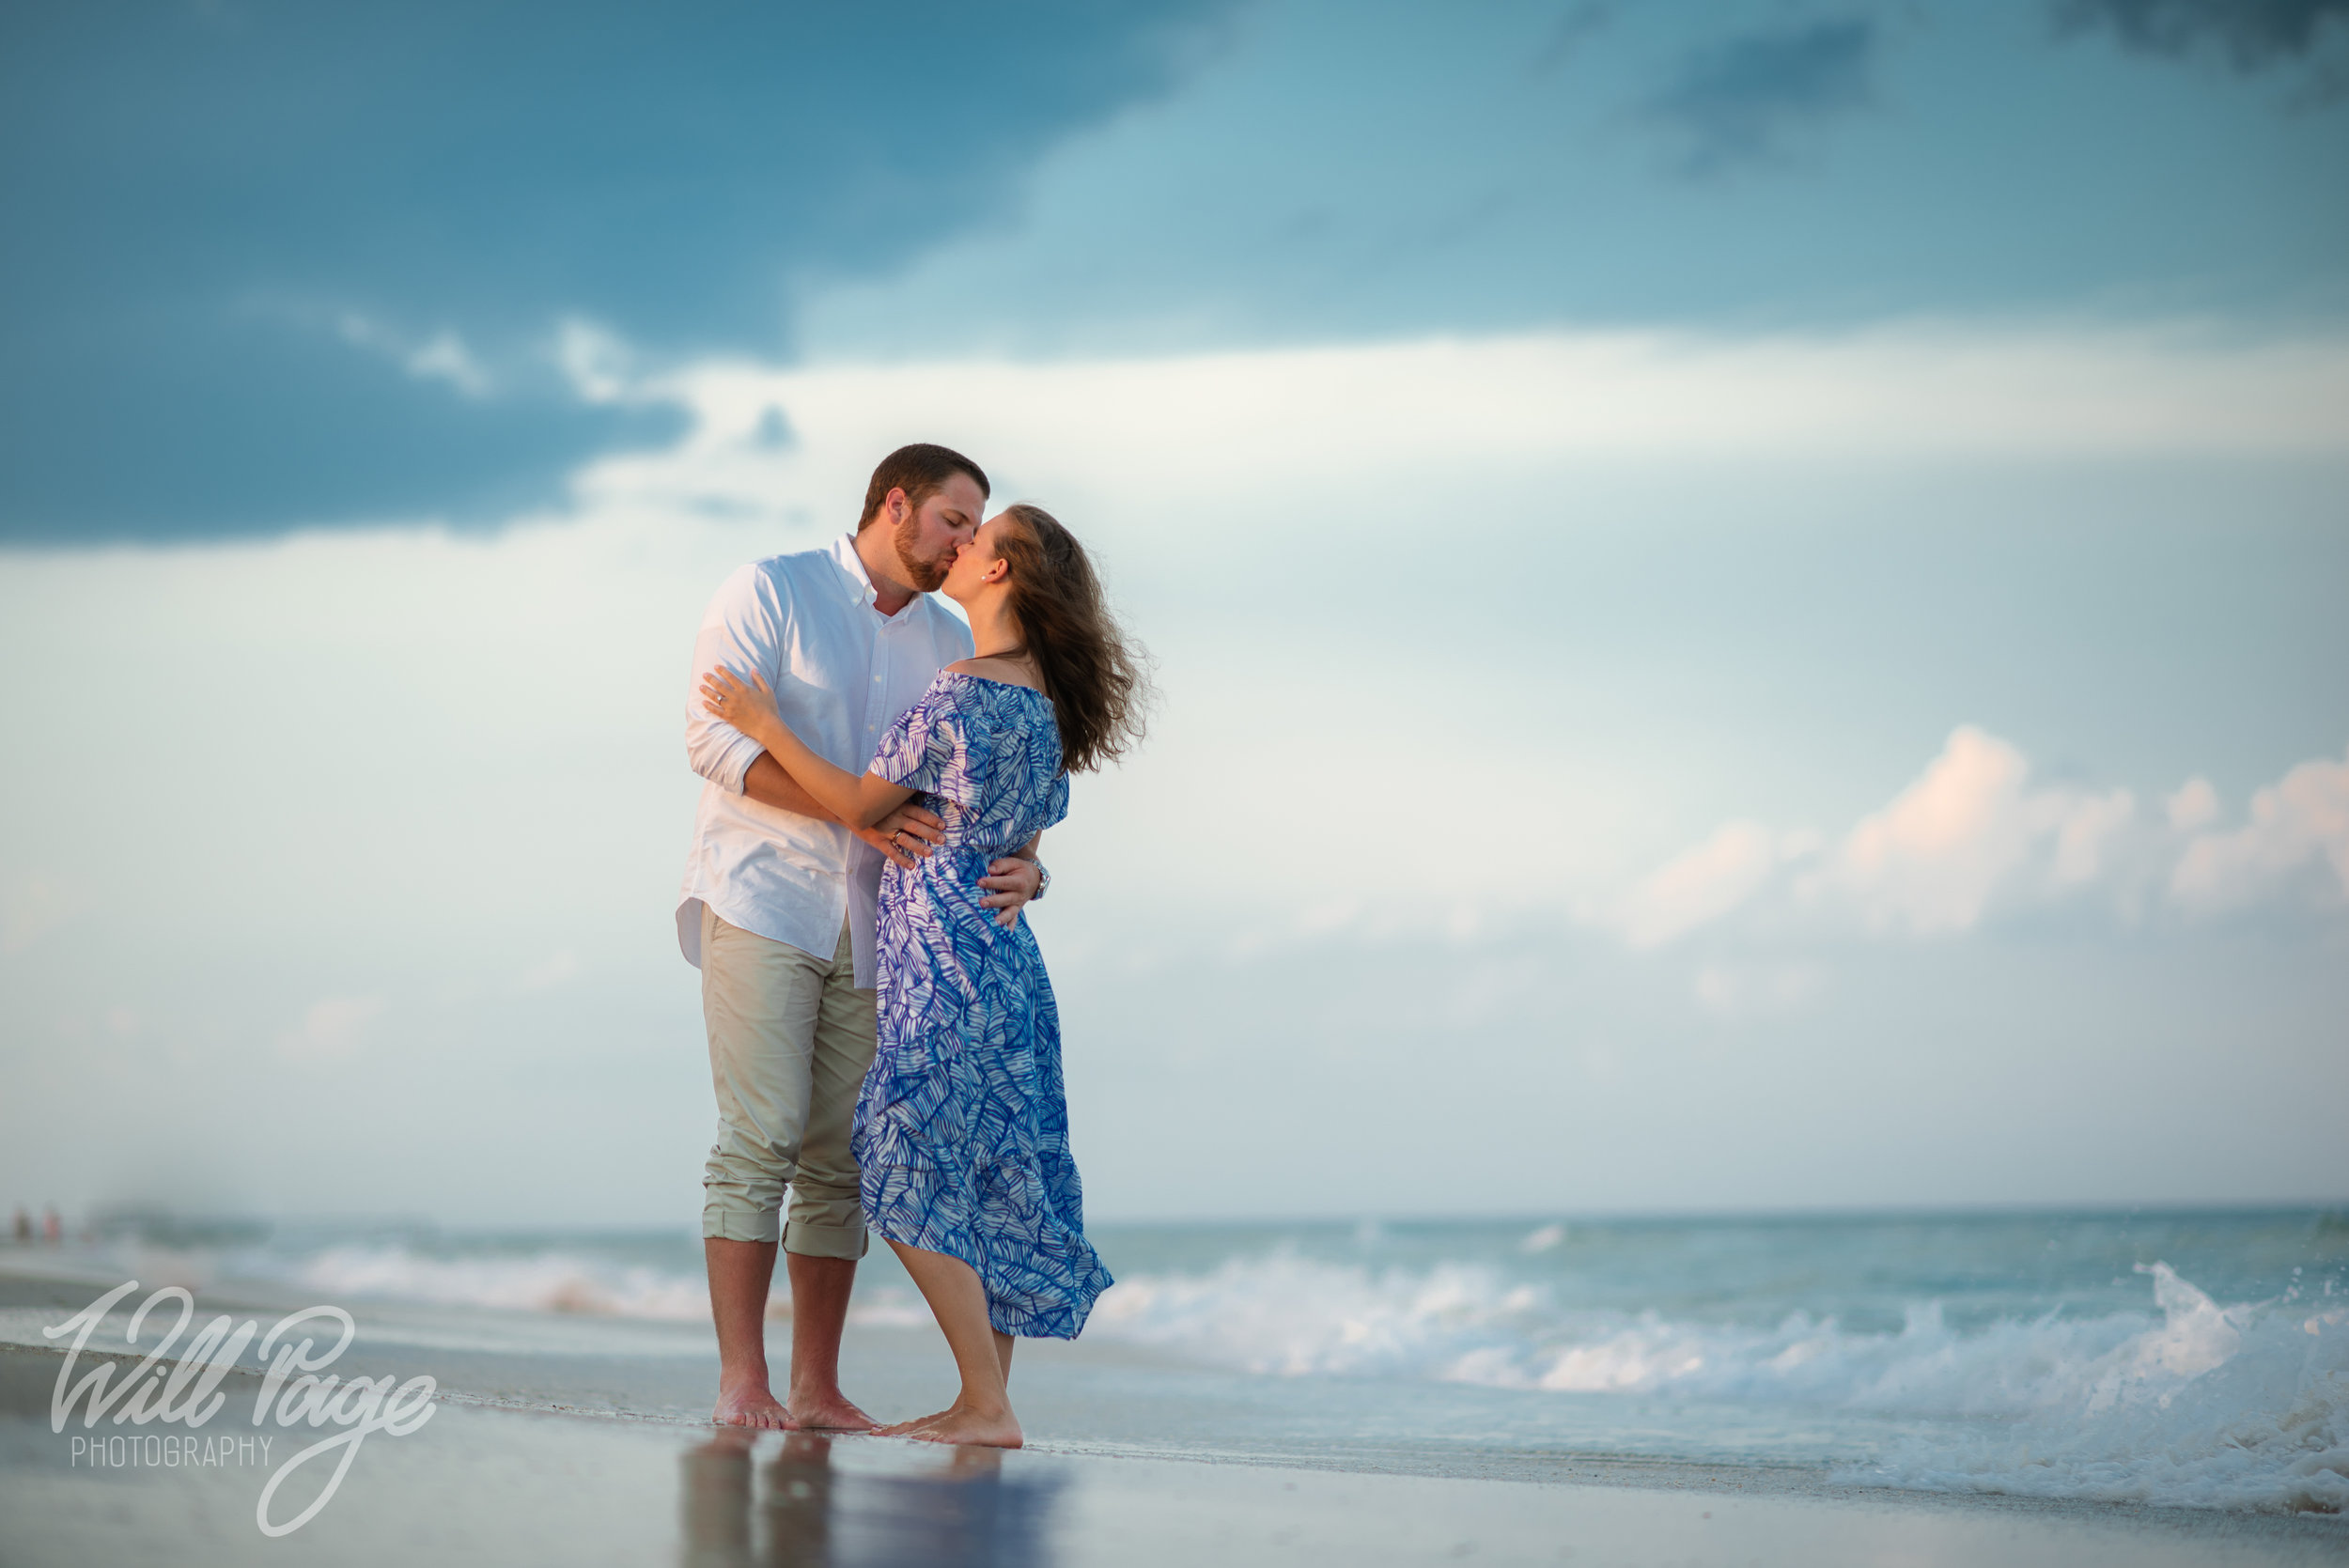 Wrightsville Beach Nc Wedding And Portrait Photography